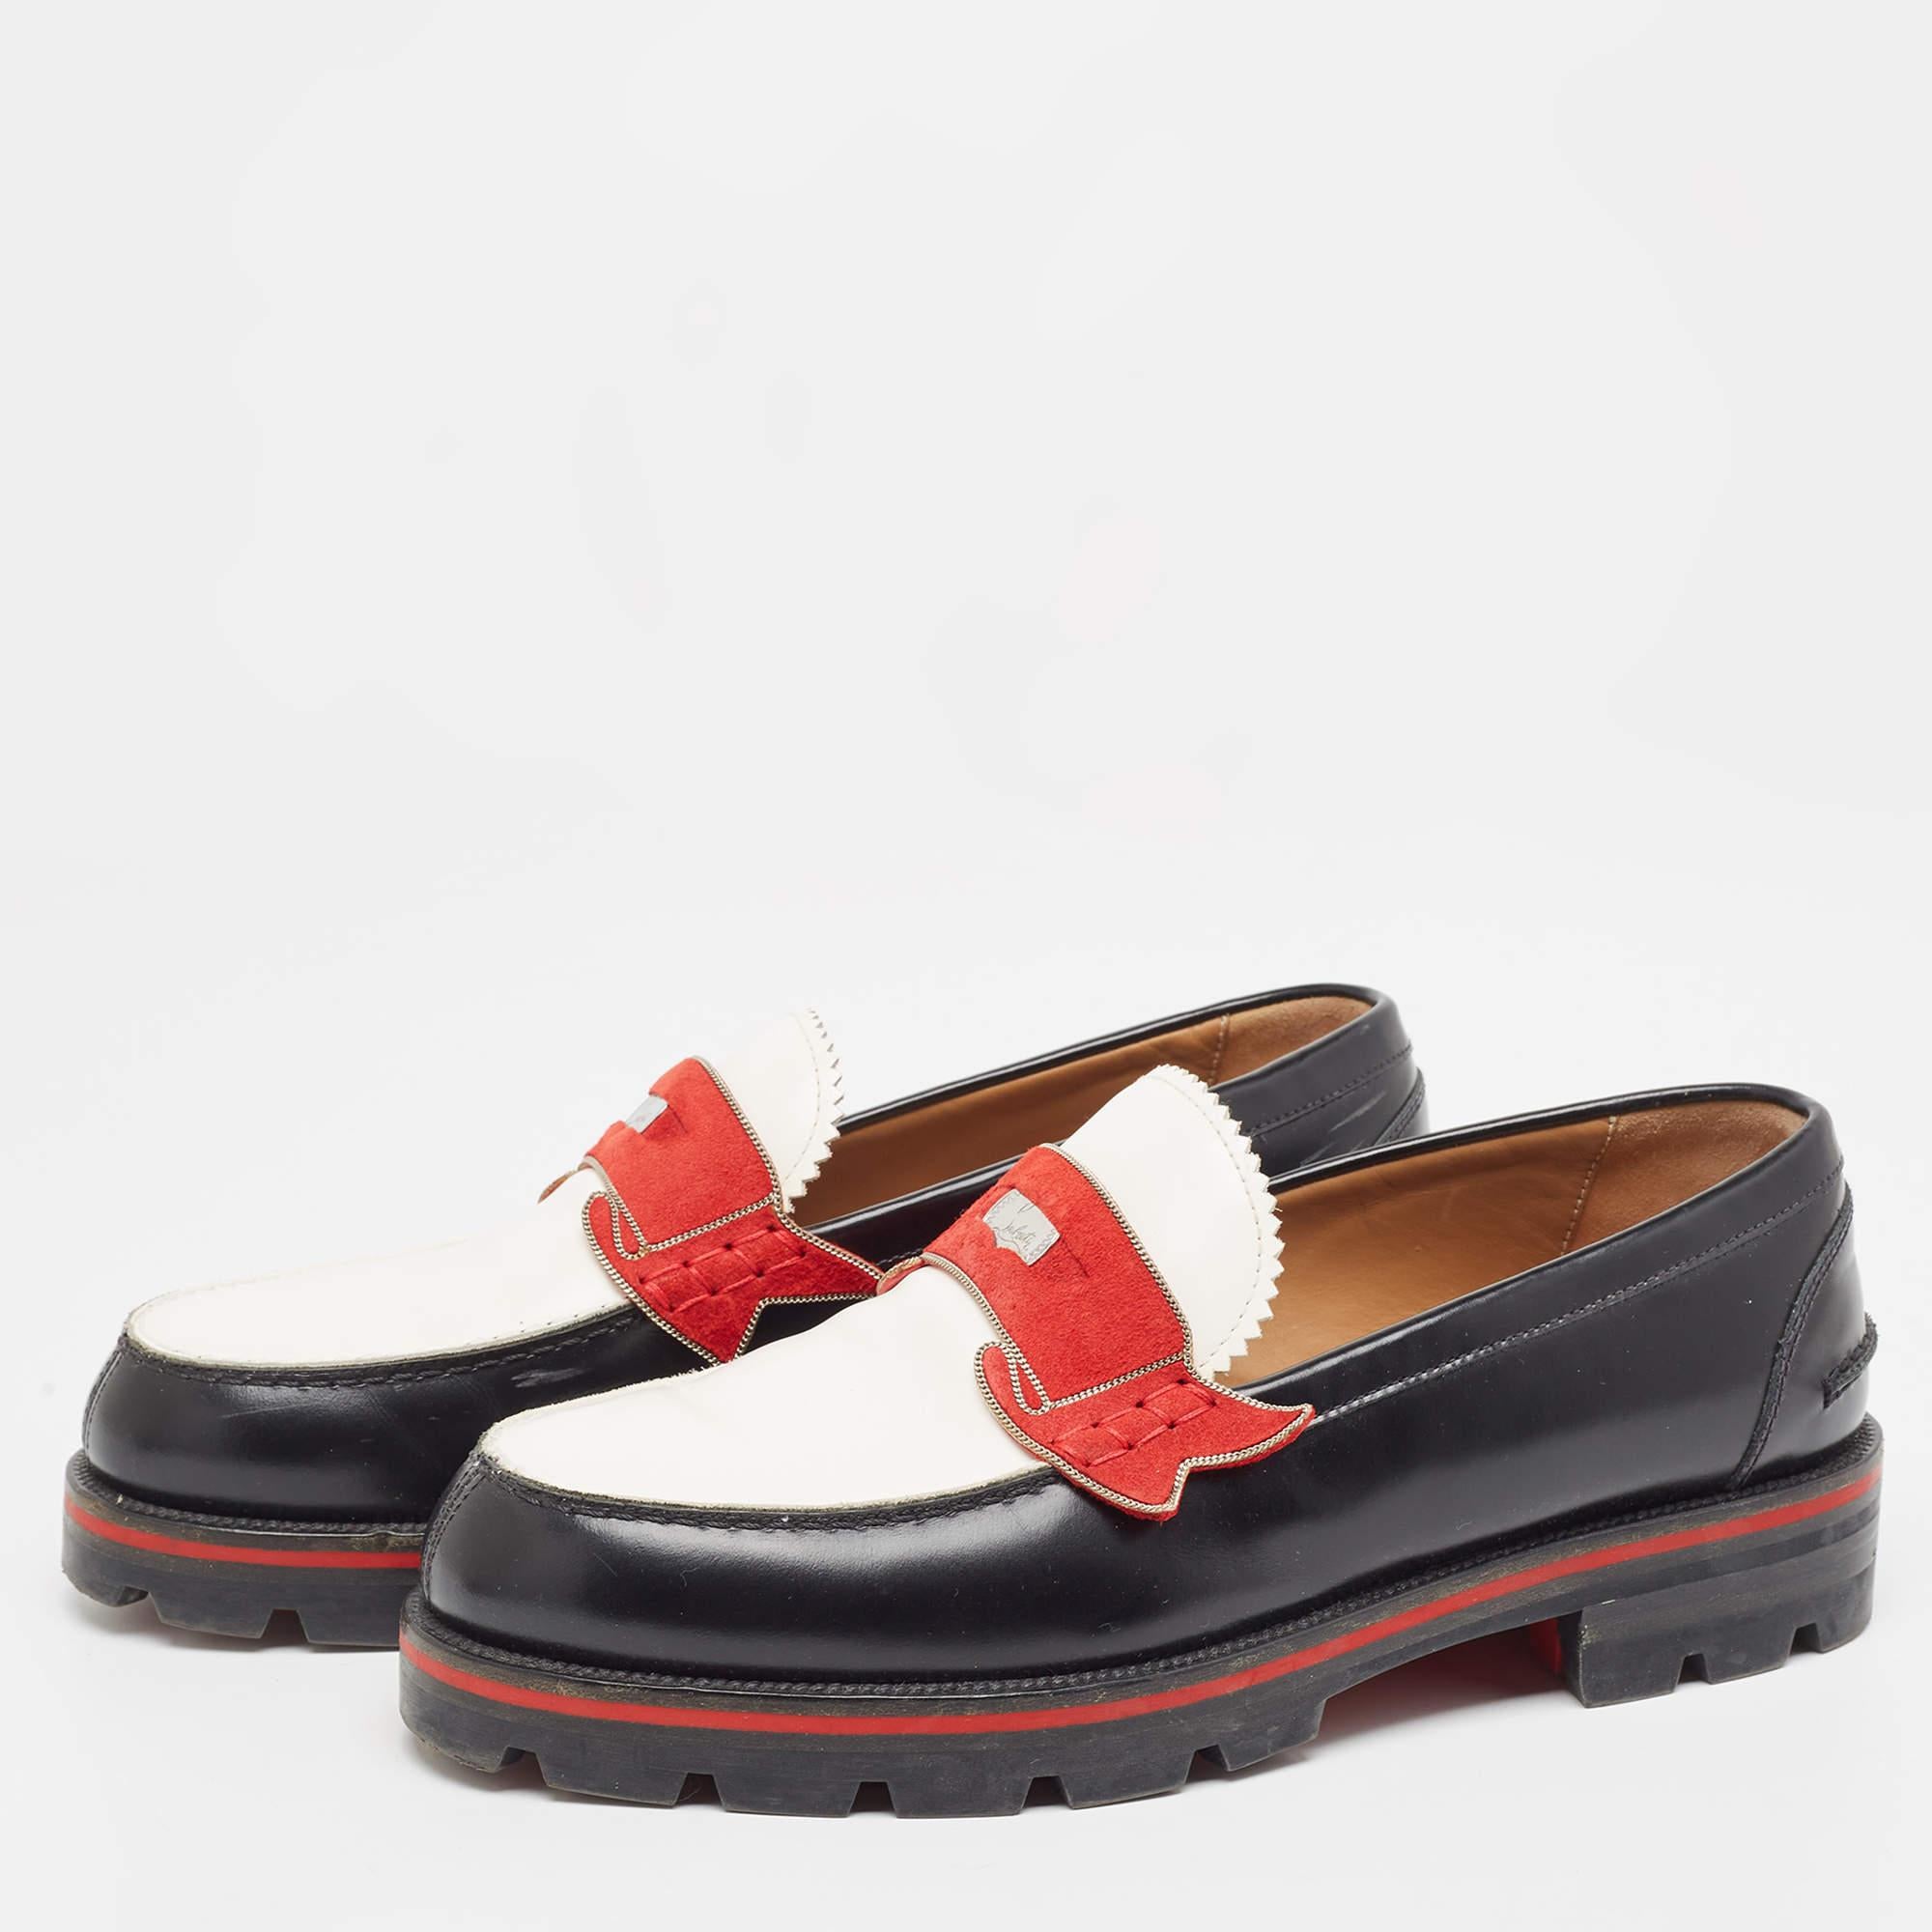 Christian Louboutin Tricolor Leather Monono Loafers Size 40 For Sale 3